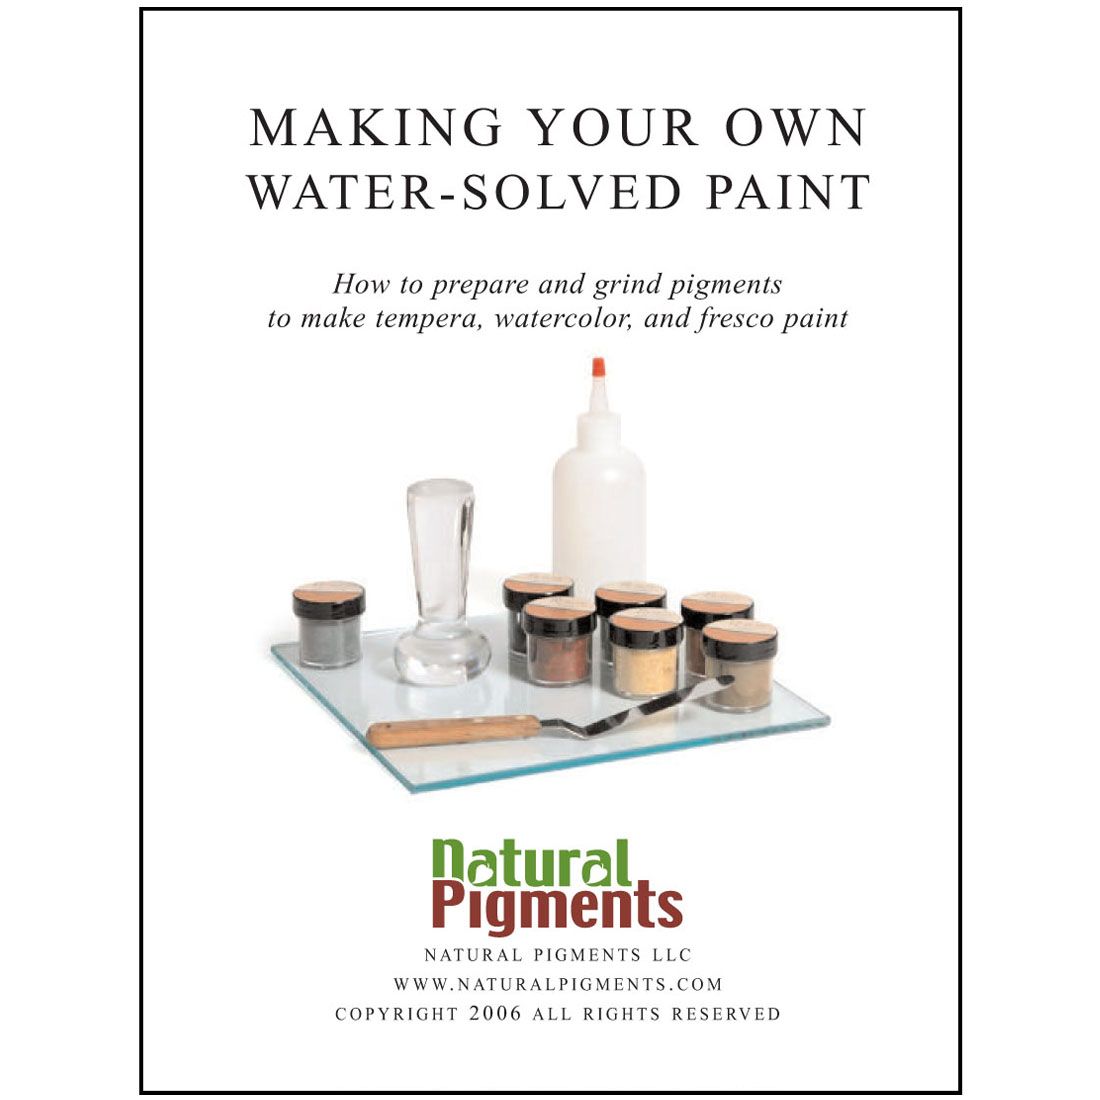 Making Your Own Water-Solved Paint